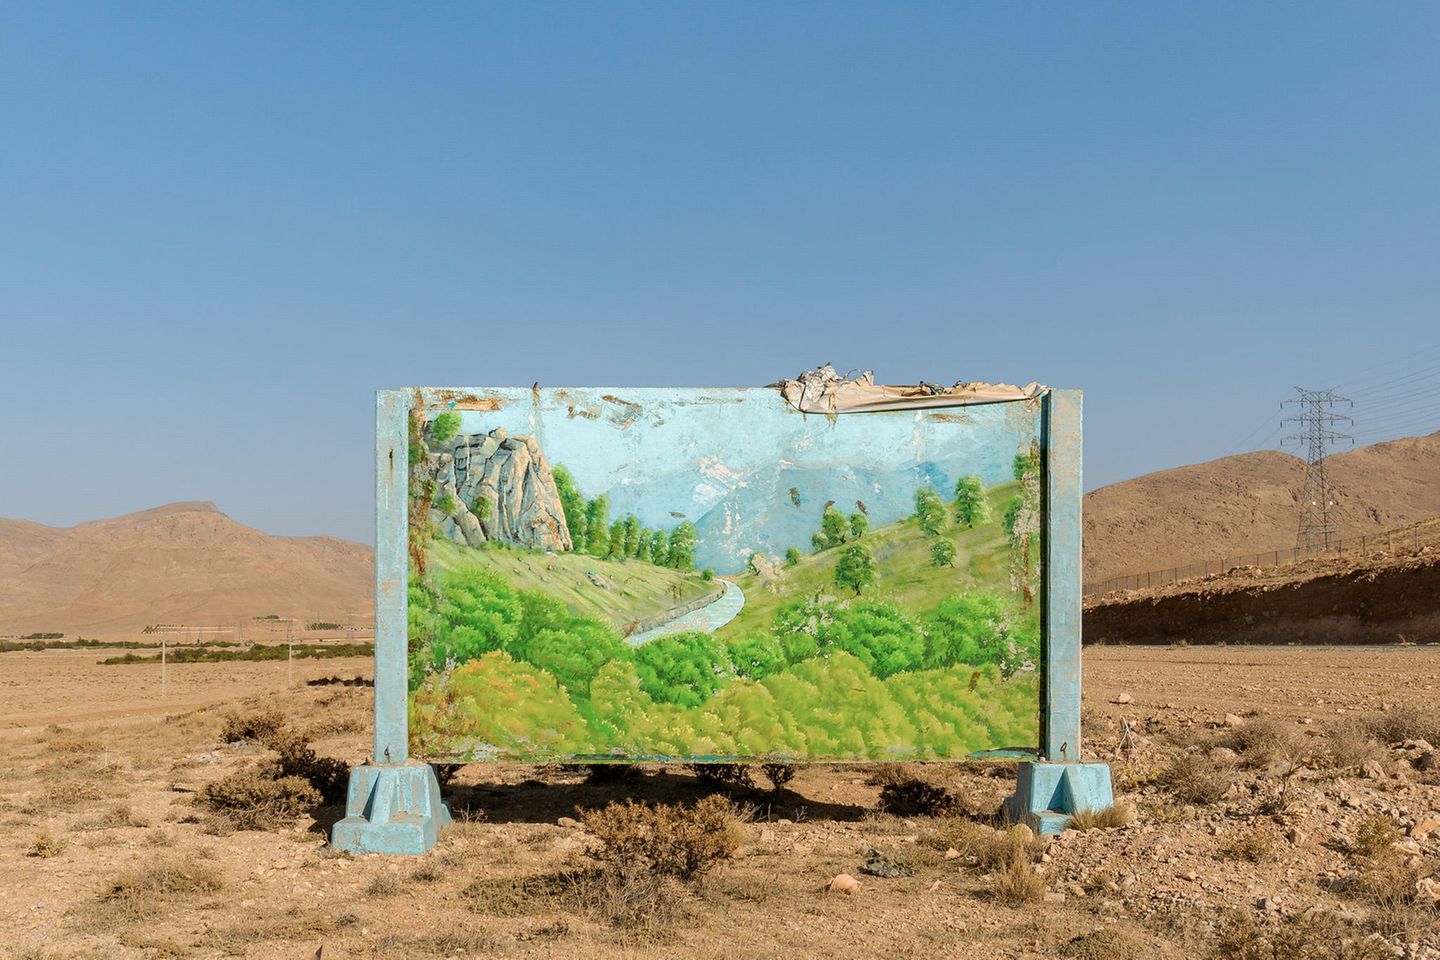 Image Name: Chahar Mahal and Bakhtiari Province – Kurd City – 2021  Photographer Name: Majid Hojjati  Year: 2022  Image Description: A painting of lush nature, with the clean climate of Chahar Mahal and Bakhtiari province’s past,  is located in the dry desert of this province. The sign reads: ‘I must remember not to do anything that is against the law of the Earth’.  Series Name: The Earth Belongings  Series Description: Life has meaning in human beliefs with its symbols. Mountains, forests, plains, free and beautiful creatures, and clear blue skies are all creations that will come to mind when we hear the word ‘life’. Where it is free from the fence of man, and there is no trace of human presence in it, it is ‘nature’. Where humans stepped in without understanding and respecting the spirit of nature, they endangered the existence of other beings. And then from this soil, nothing but a lifeless body will remain. The mountains will forget the flight of the eagles, and the noble howls of the horses will not be heard in the plains; and even the lion, that king of the forest, will be only a name in the books. These elements belong to the planet and are inseparable from it, without them what is left is a cold, lost and distorted image that no longer resembles anything. Maybe it's time to weigh what we have taken from nature and what we have given it and measure what we have done with the universe.